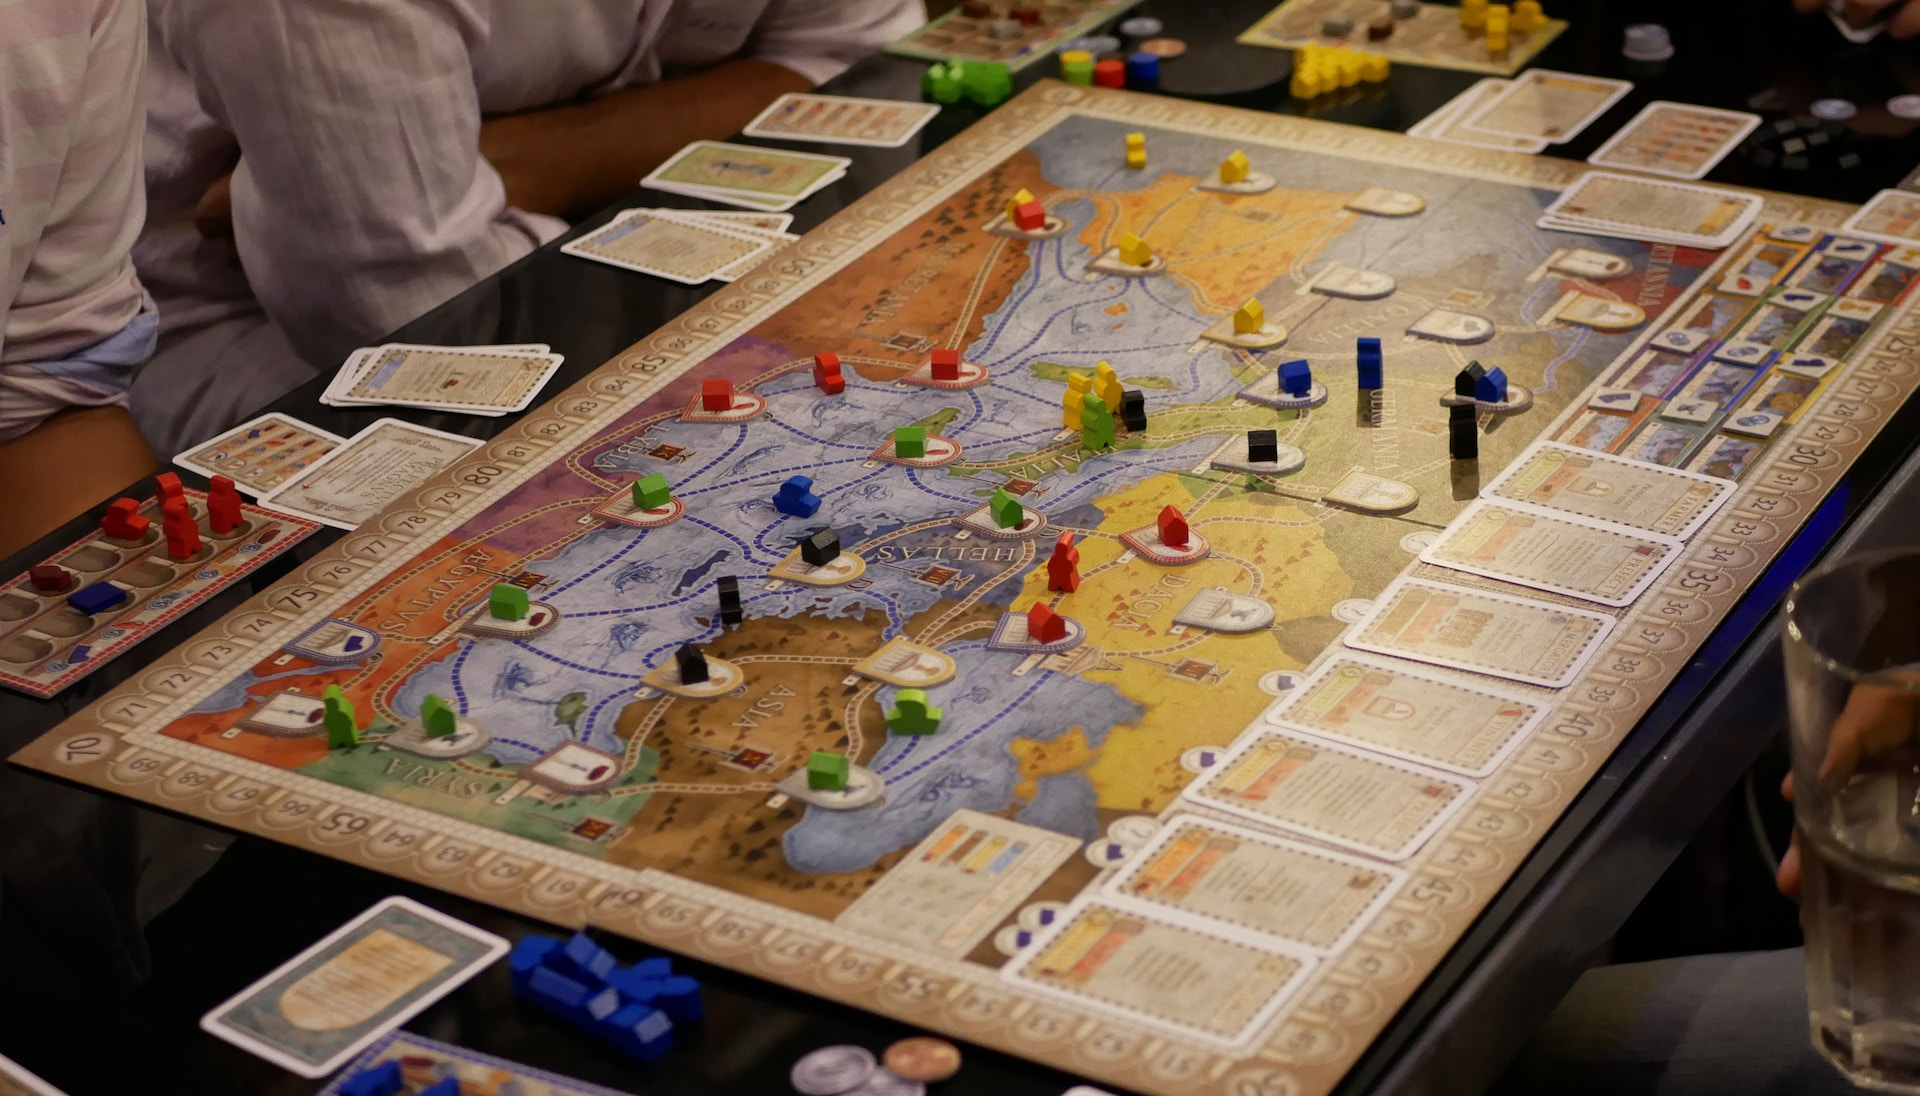 How Travel Board Games Make the Journey A Little Easier